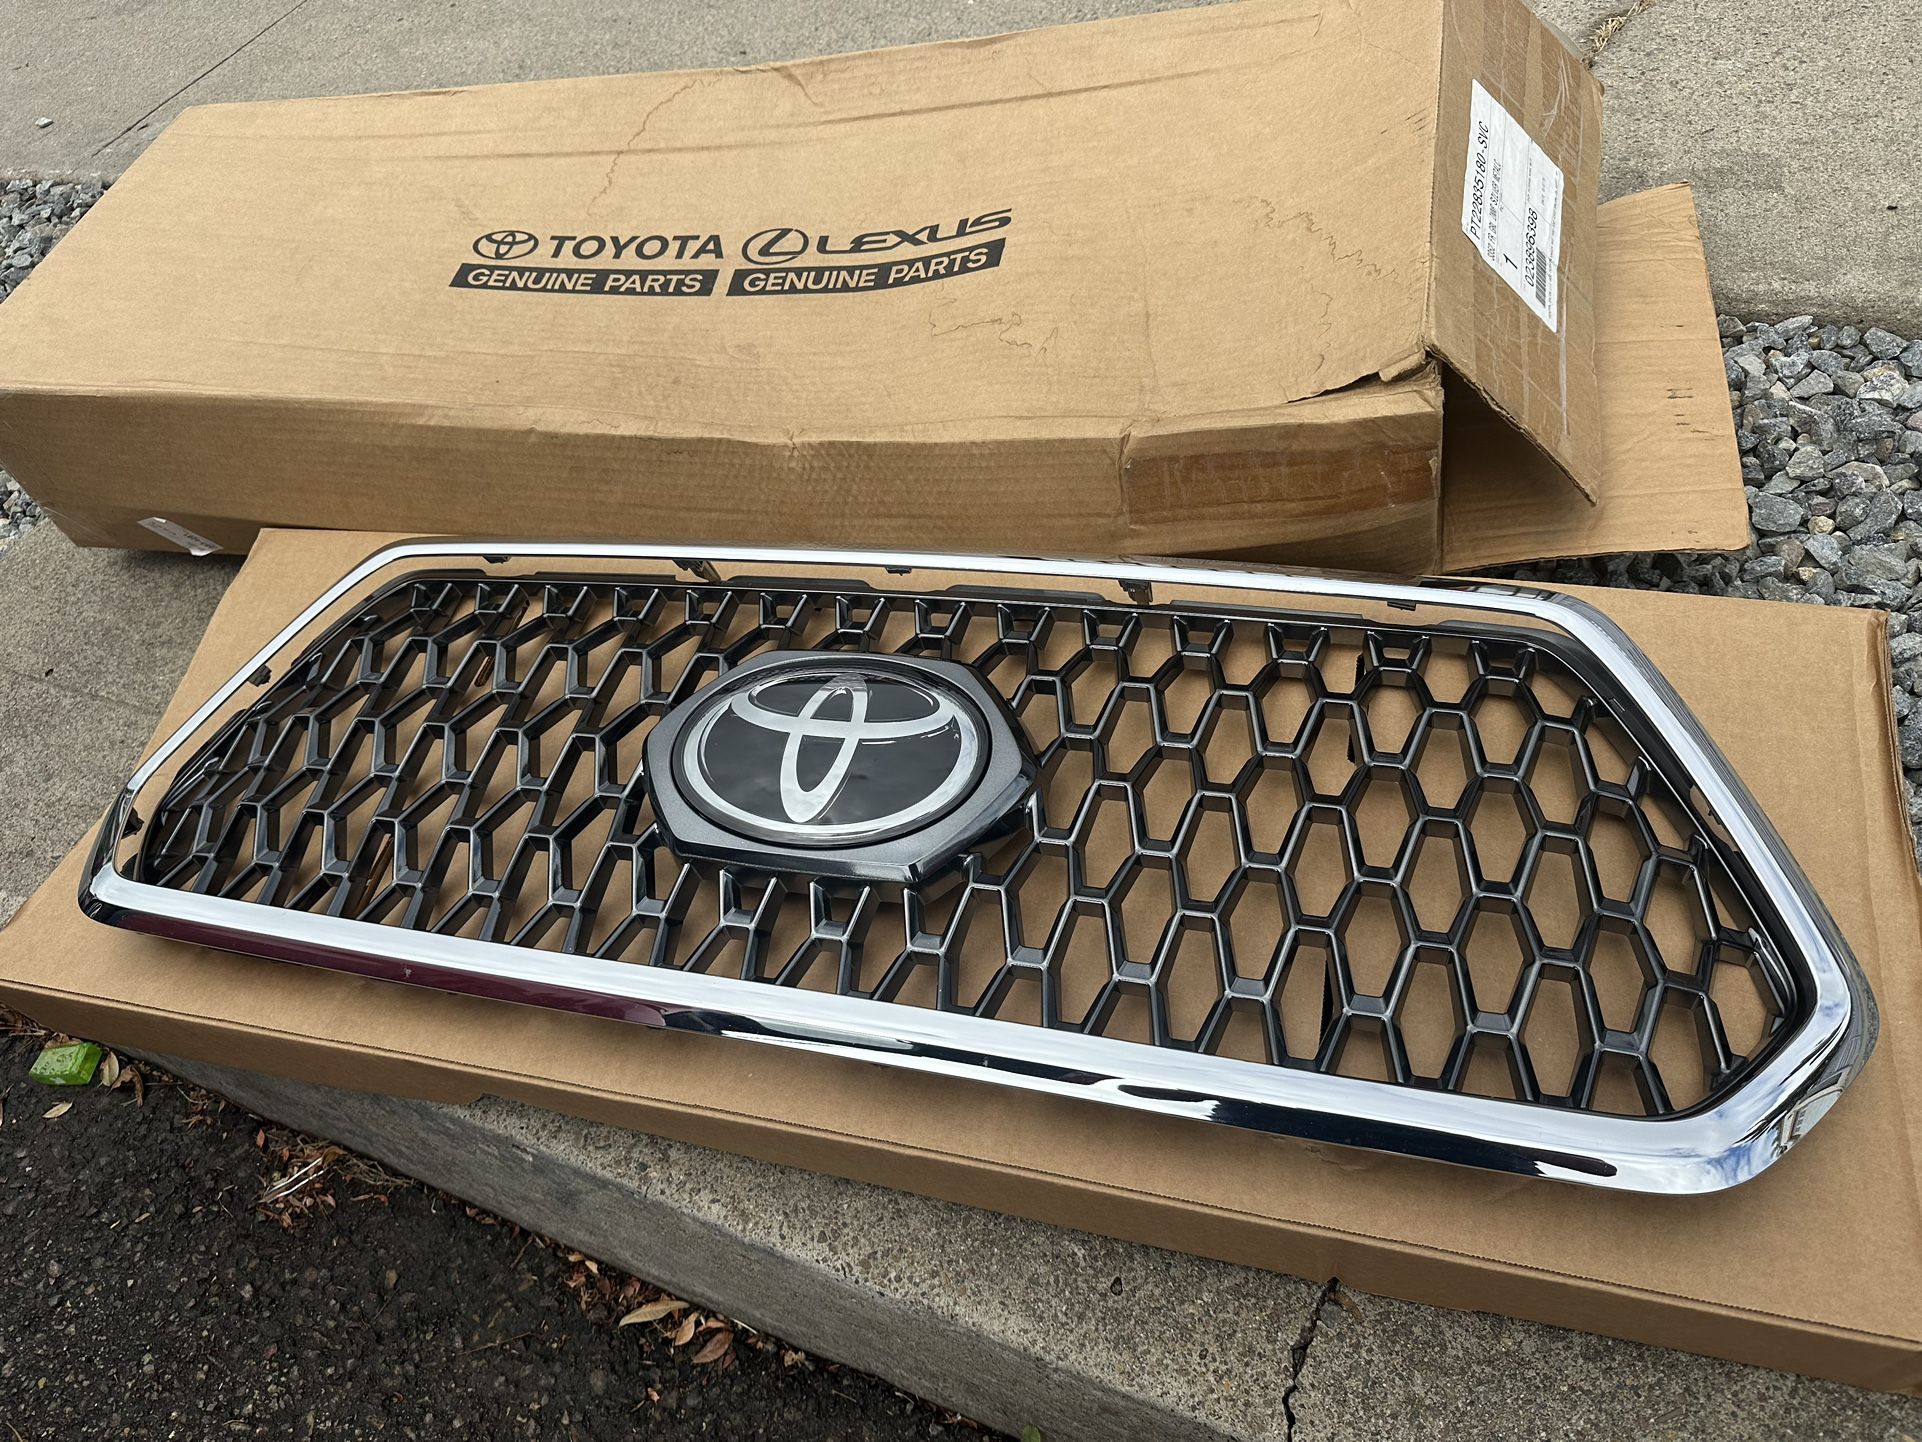 Toyota Tacoma Front Grill